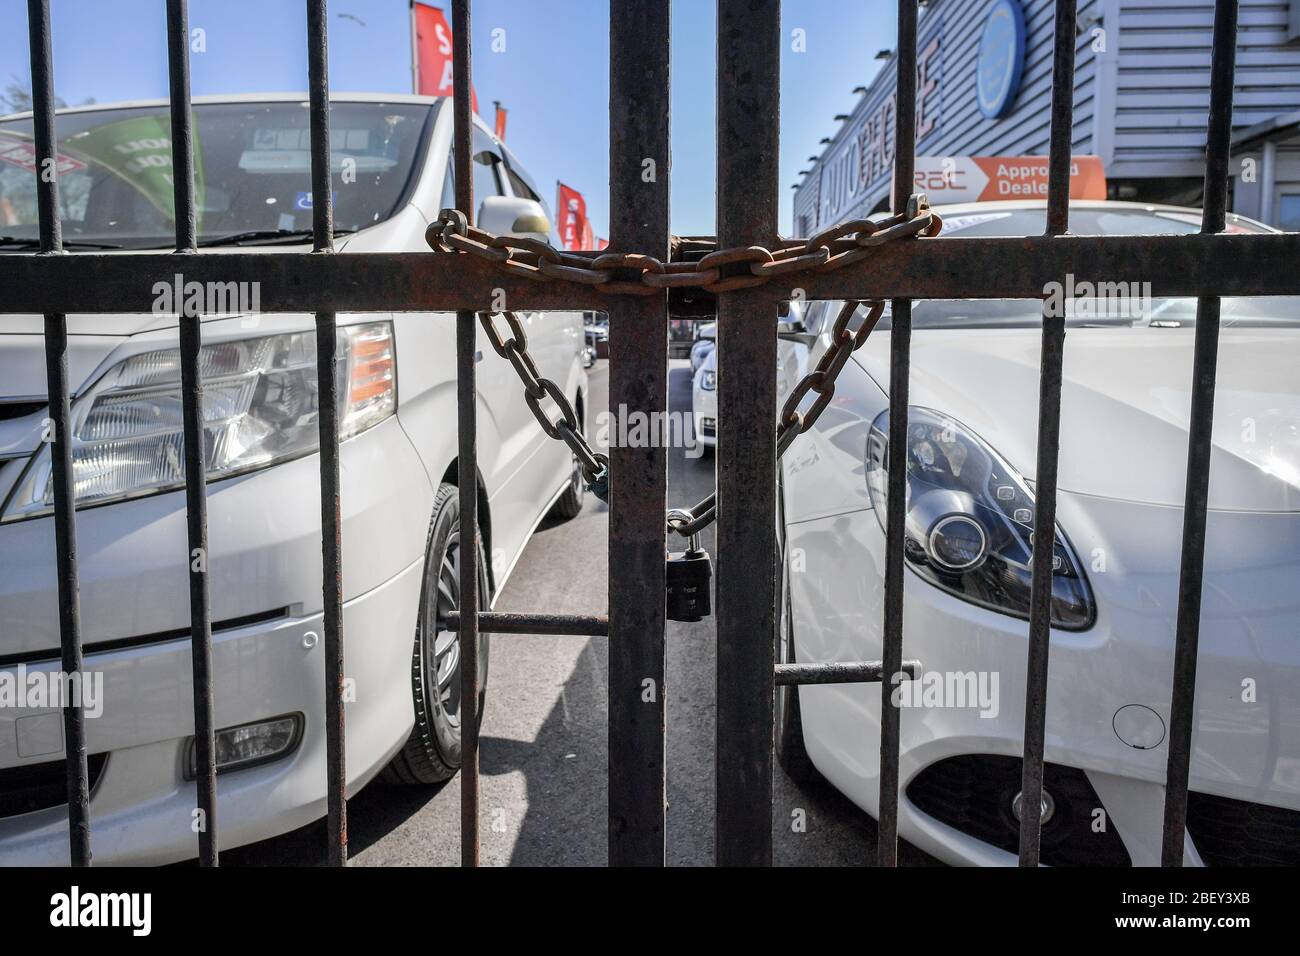 NOTE: IMAGE 30 OF A SET OF 35 IMAGES FEATURING LOCKED GATES OF BUSINESSES AND PLACES THAT ARE CLOSED DURING UK LOCKDOWN A chain is looped through steel gates at a car sales forecourt in Bristol to prevent access as the UK continues in lockdown to help curb the spread of the coronavirus. Stock Photo